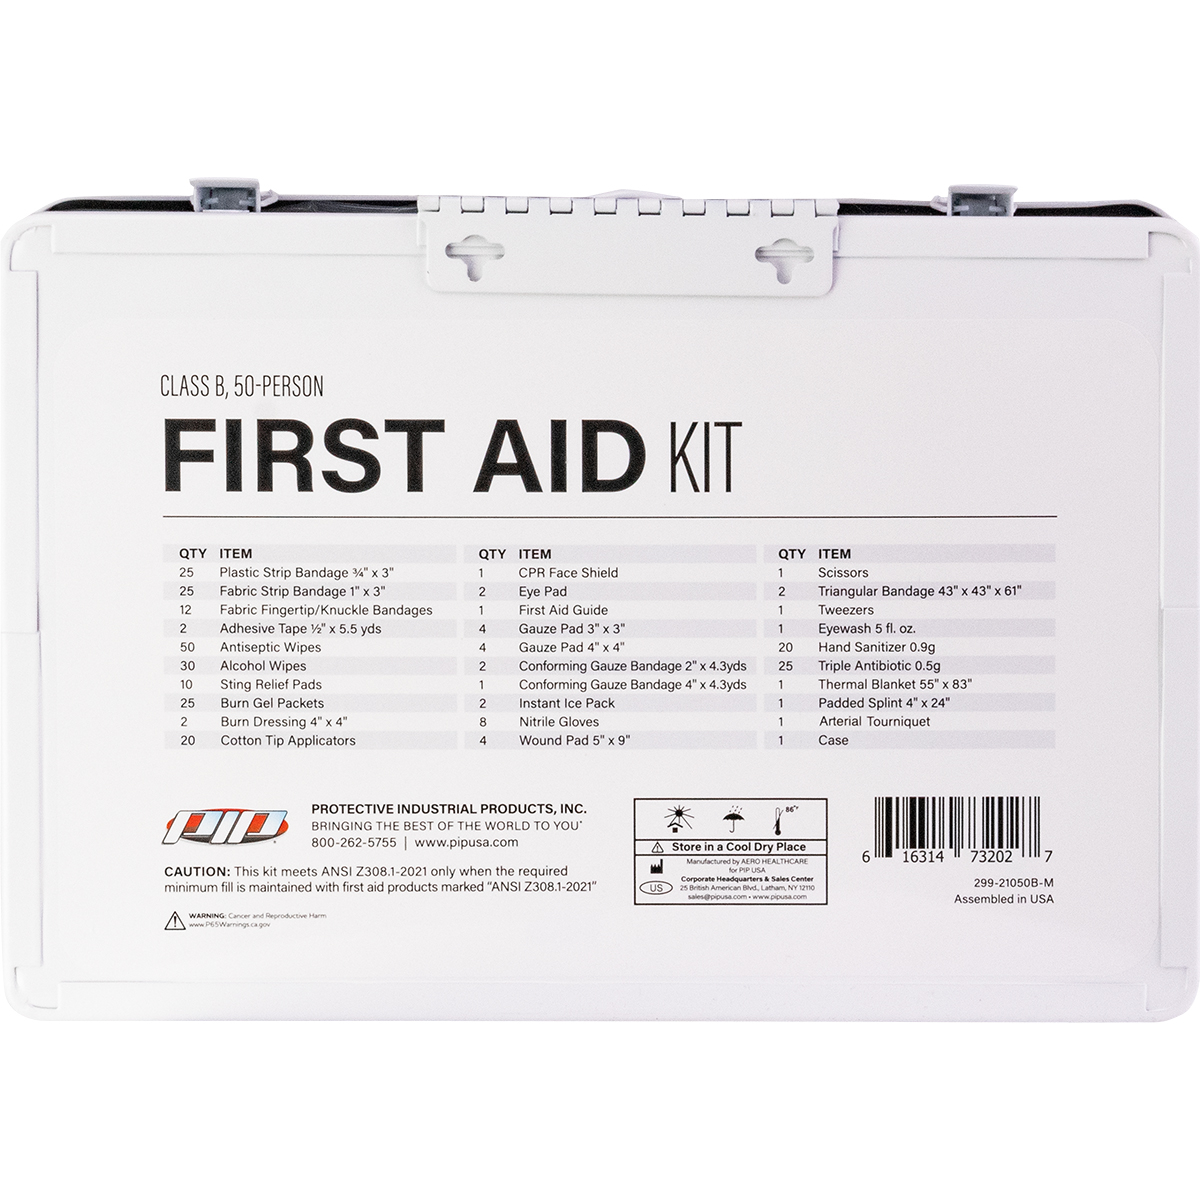 Pip ANSI Class B Metal First Aid Kit - 50 Person from Columbia Safety